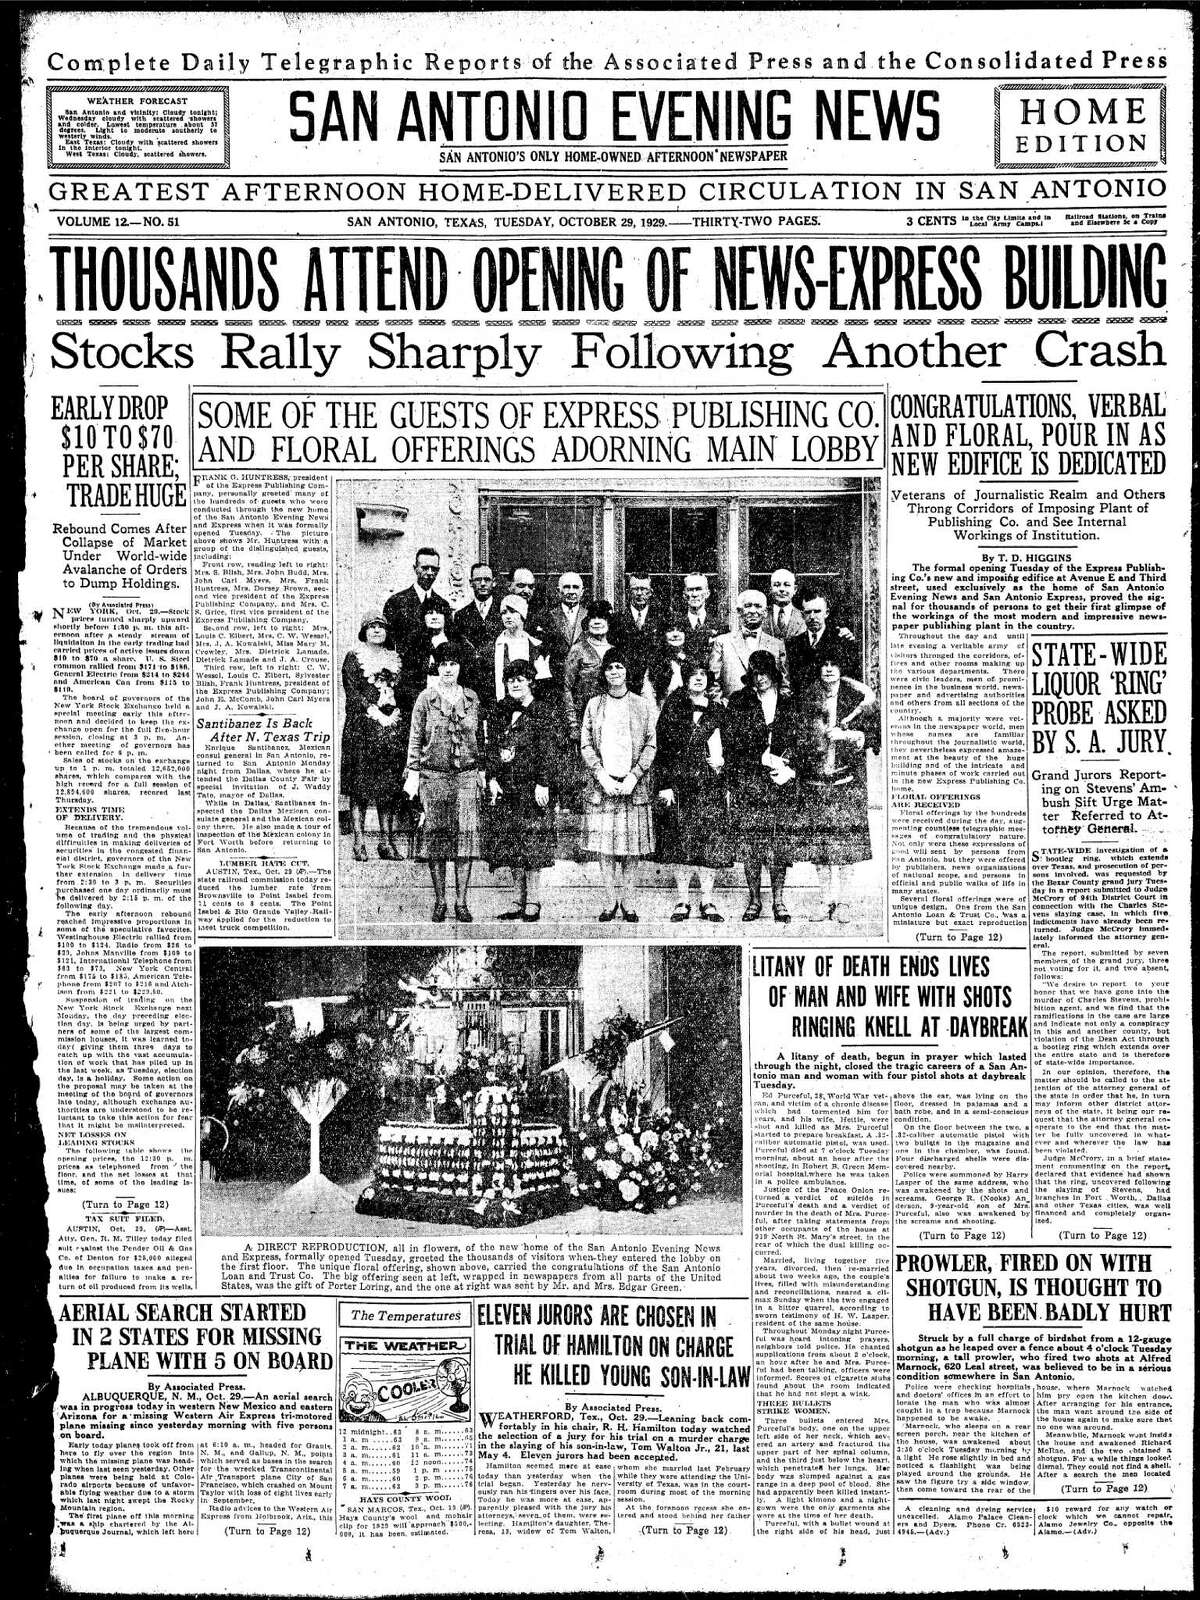 The Home Edition for the San Antonio Evening News led the front page with this big headline: “THOUSANDS ATTEND OPENING OF NEWS-EXPRESS BUILDING” and a headline under it said, “Stocks Rally Sharply Following Another Crash.” The date was Oct. 29, 1929.